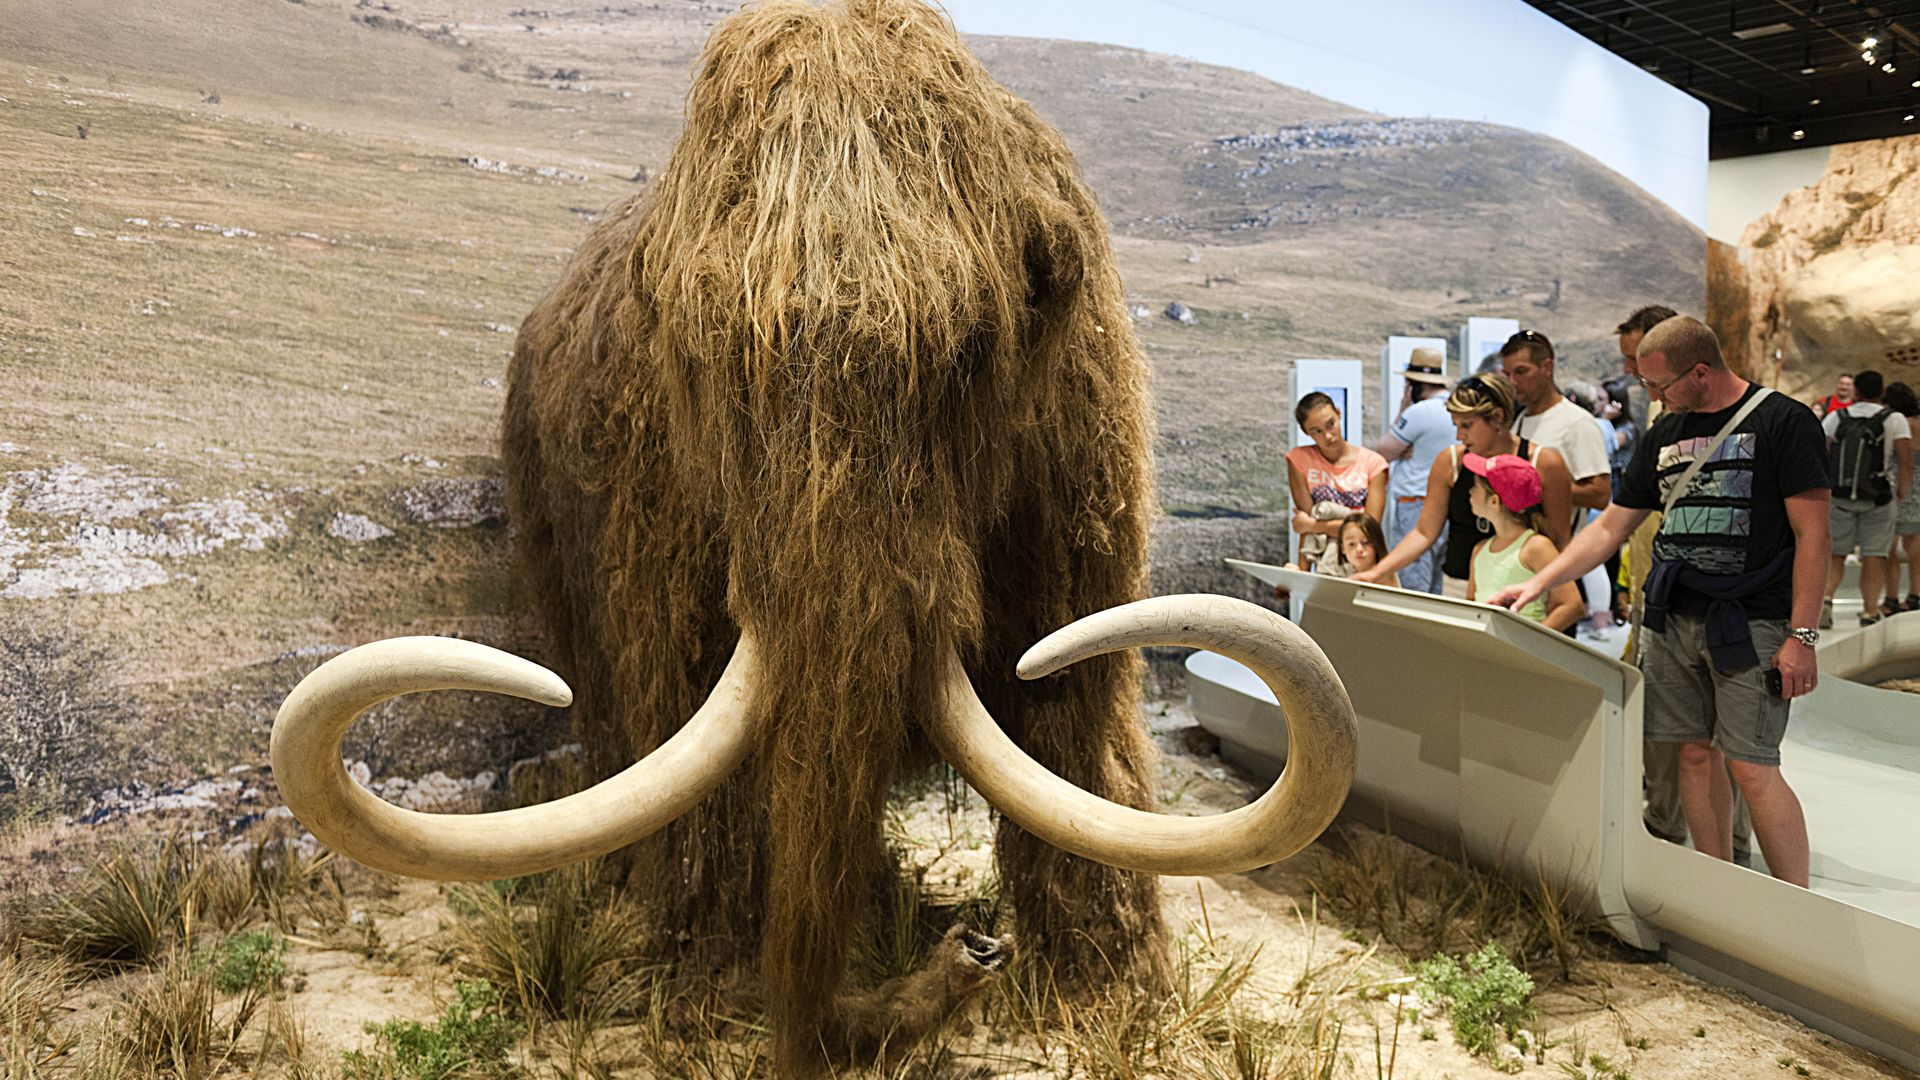 A wooly mammoth on display.